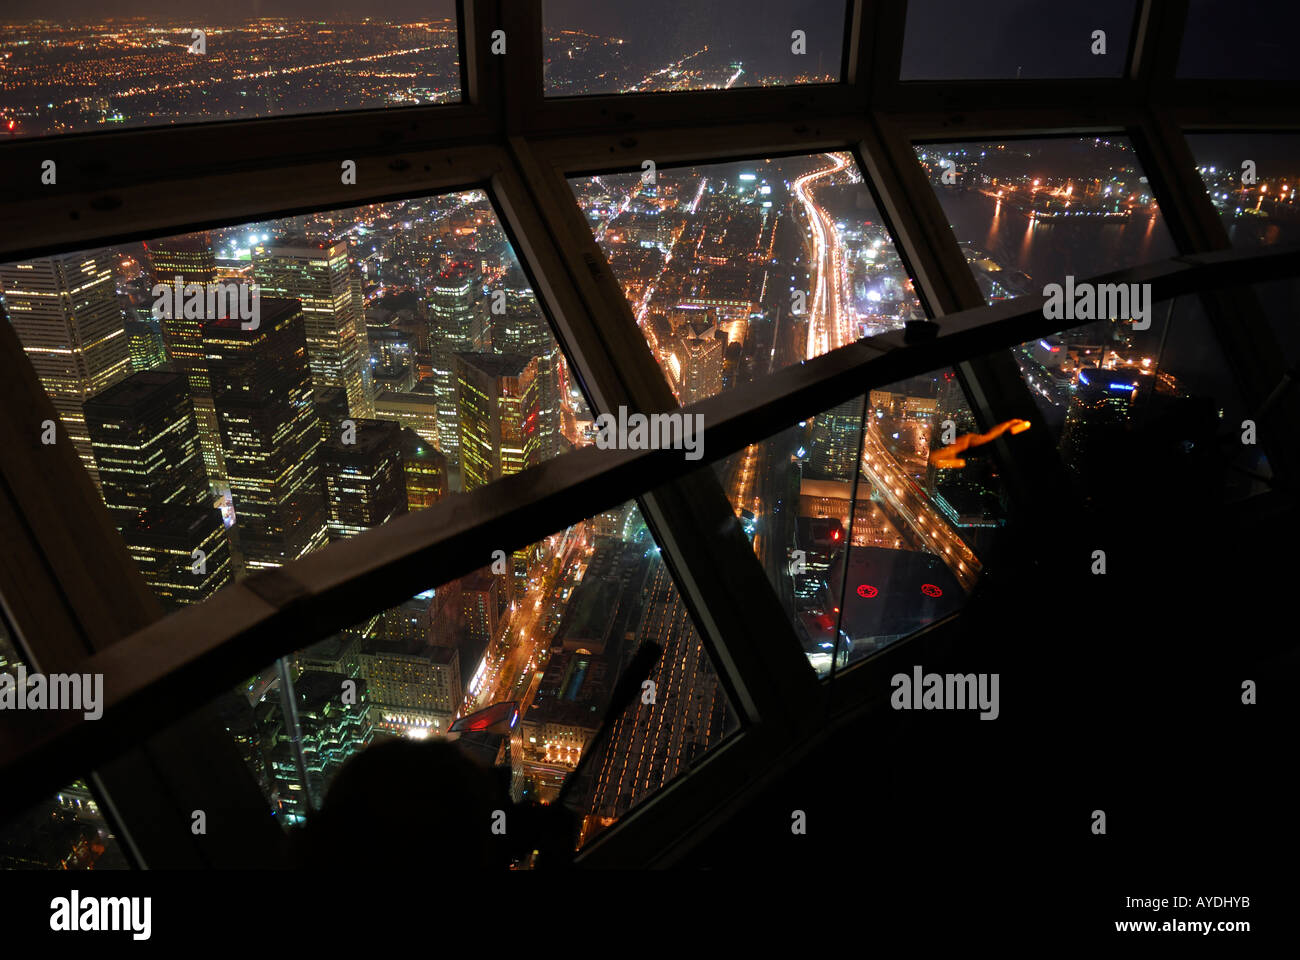 Night view of downtown Toronto high-rise towers from the CN Tower Skypod windows Stock Photo